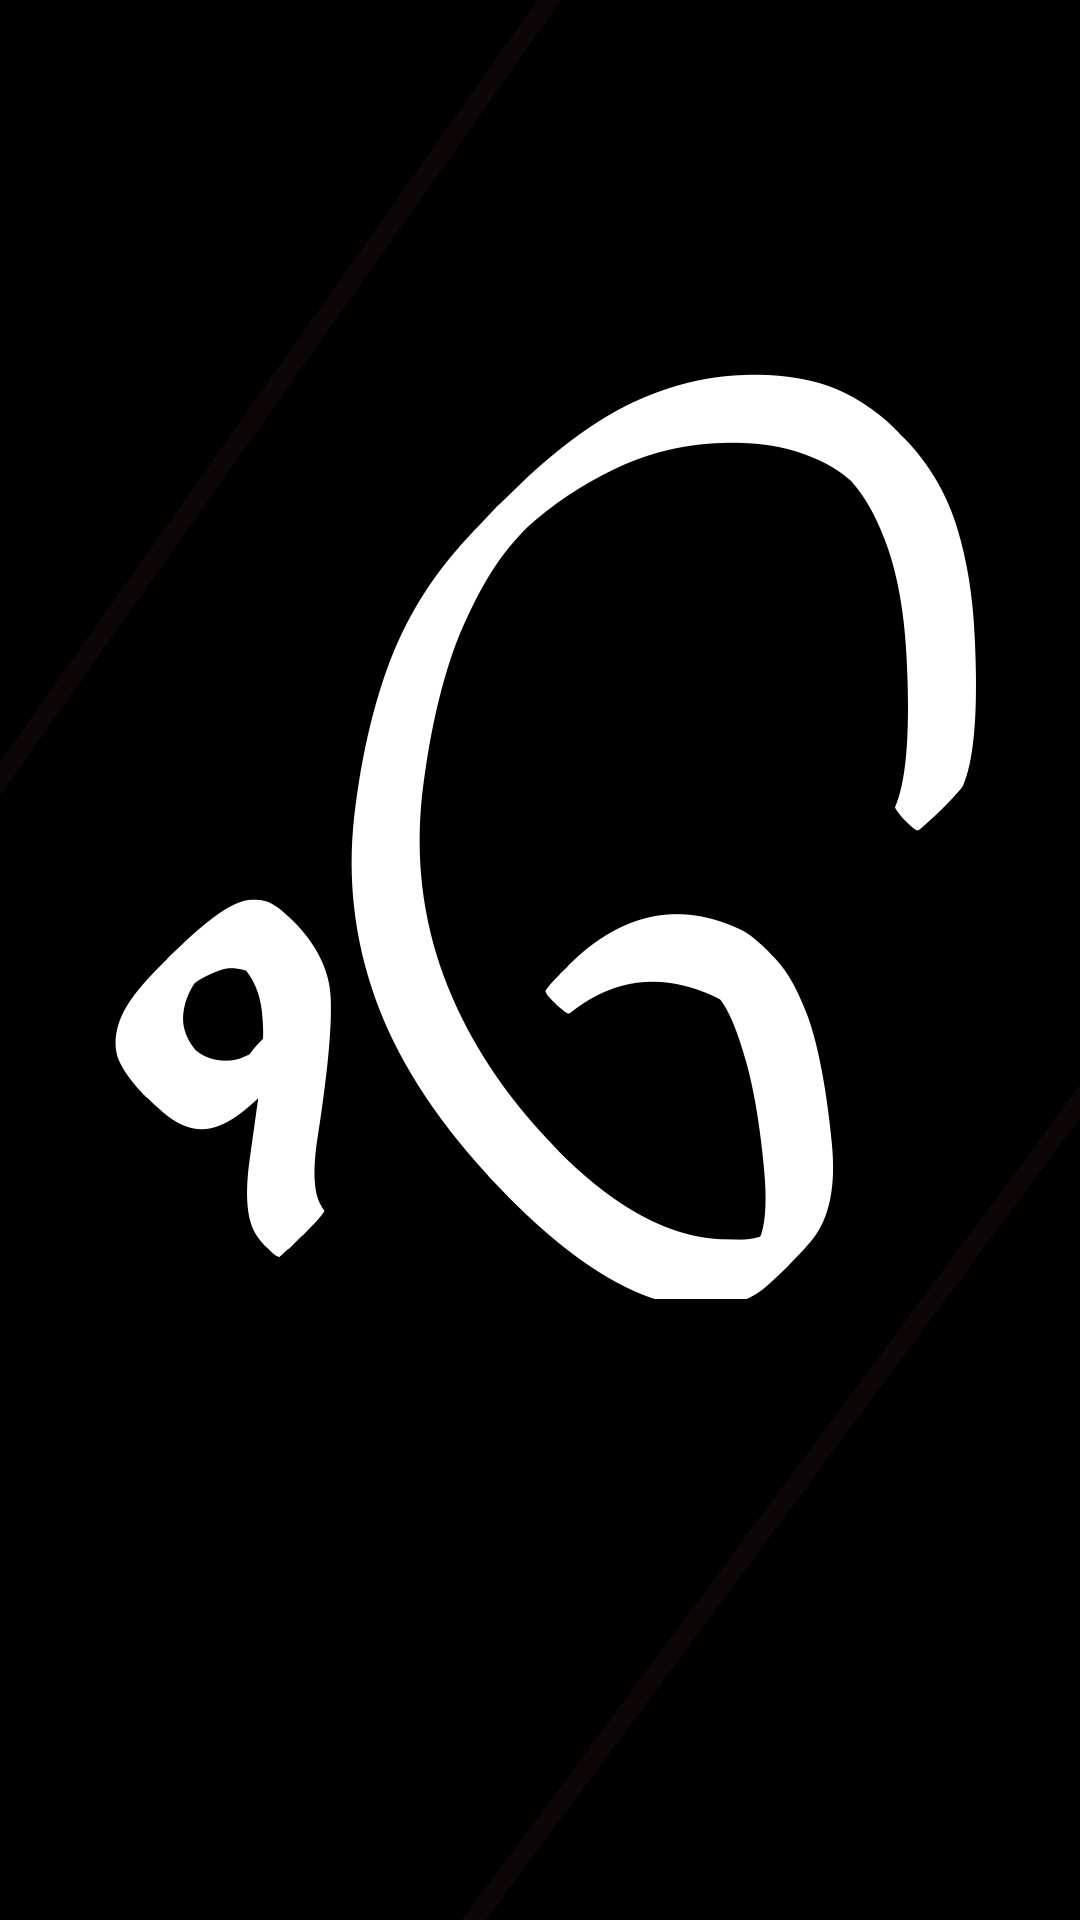 1080x1920 Mobile wallpaper: Ik Onkar. I'm trying my hands on creating mobile  wallpapers